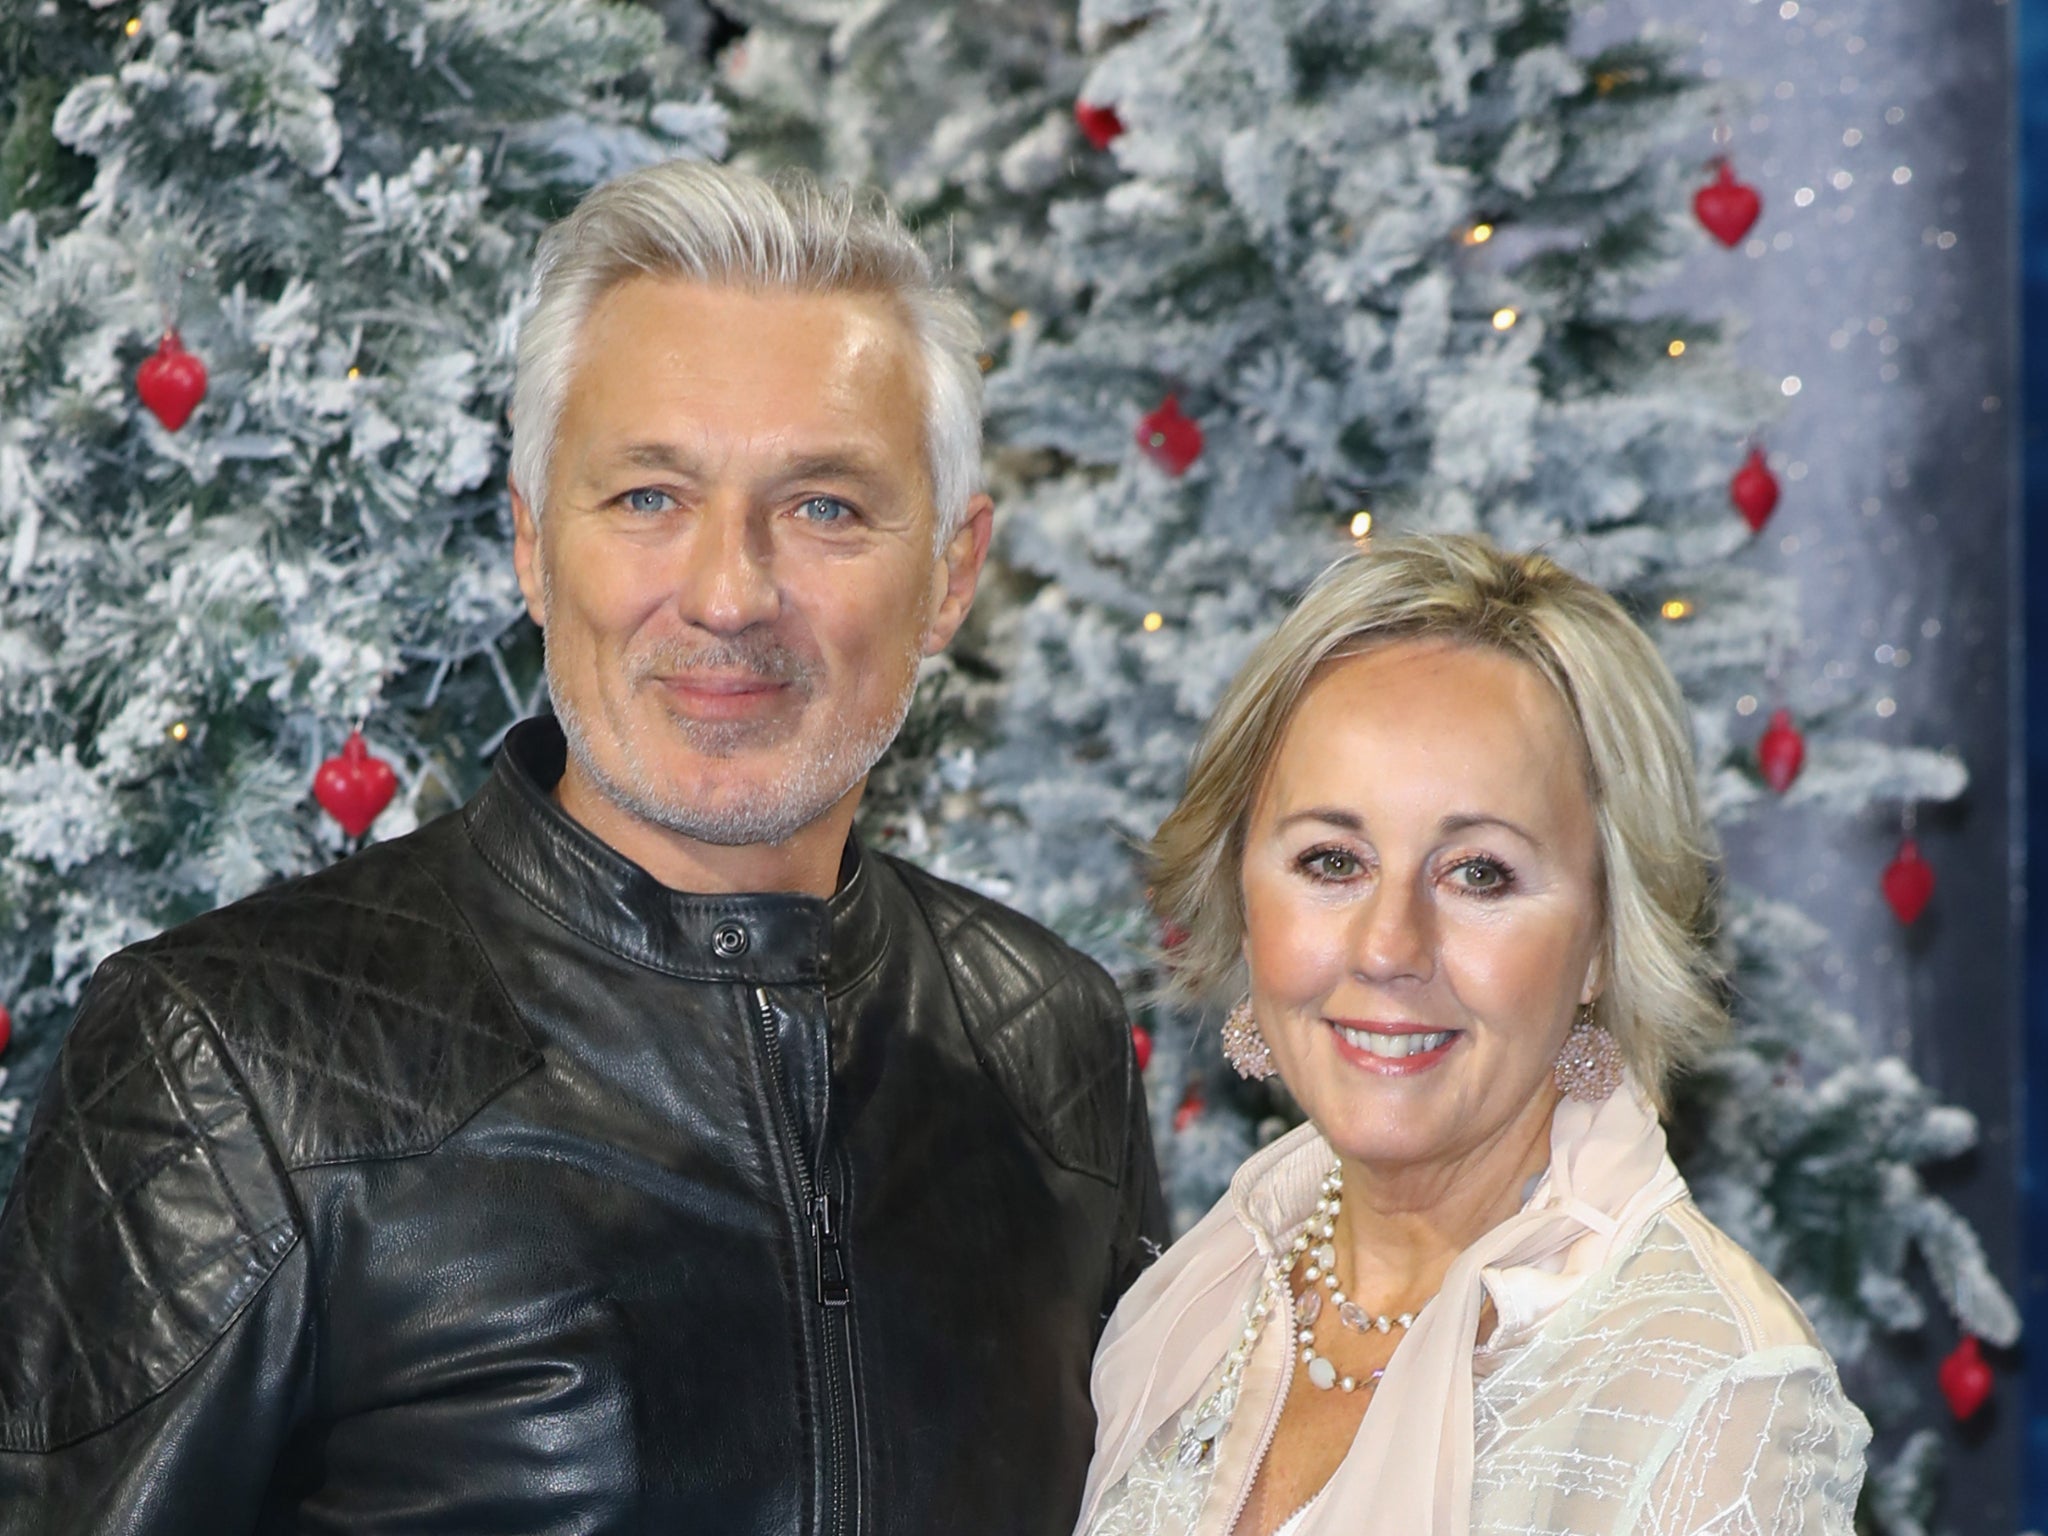 Martin and Shirlie Kemp released an album together in 2019